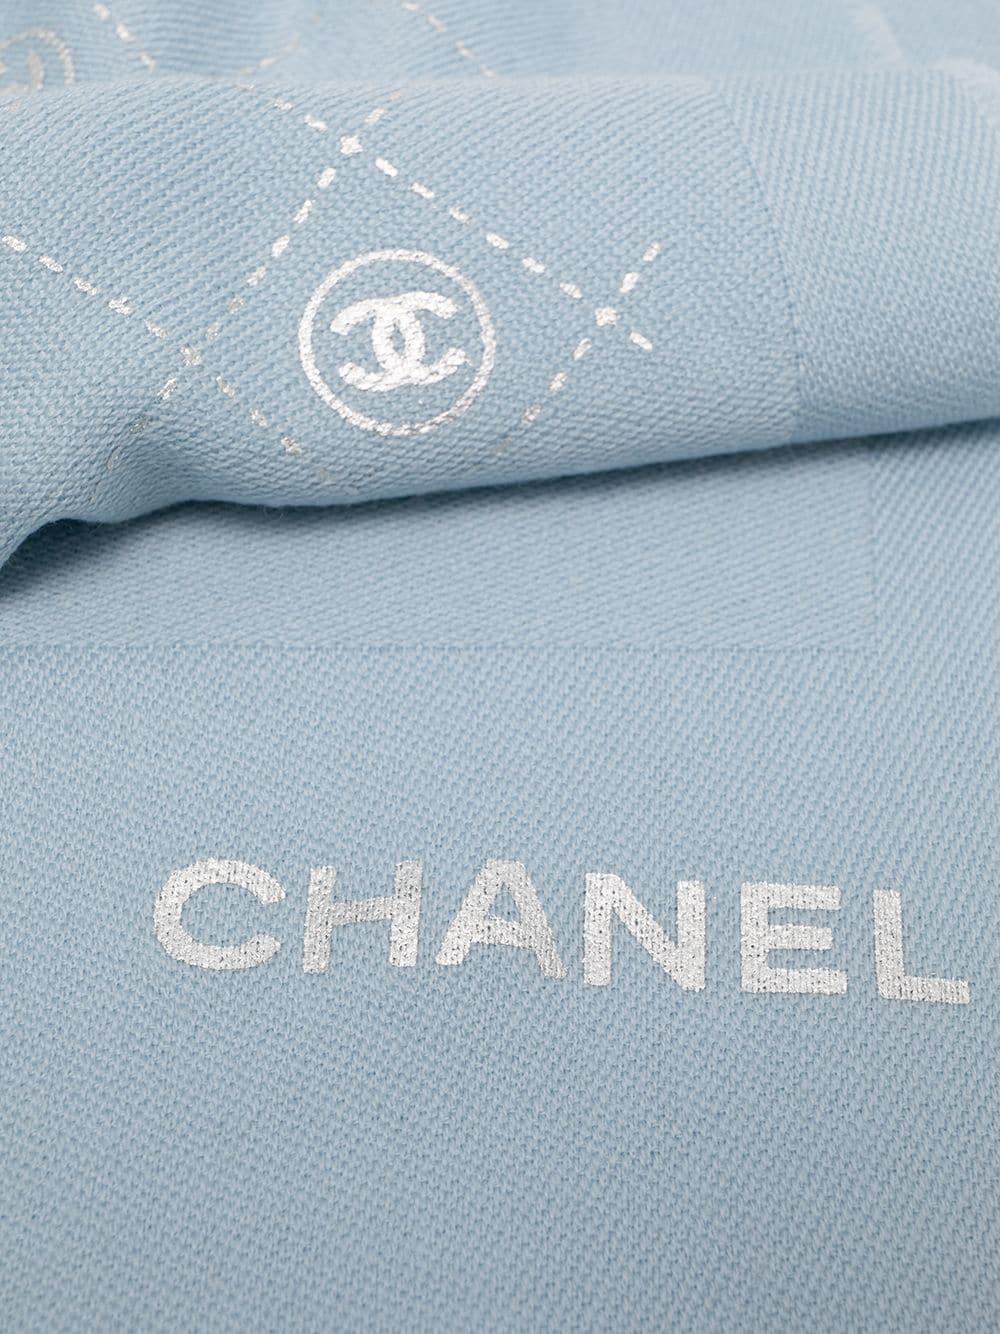 Wrap up in style and luxury comfort with this stunning yet understated baby blue coloured scarf from Chanel. Crafted from 100% wool. 

Measures 200cm x 80cm

Colour: Baby Blue

Composition: 100% Wool

Condition: Excellent condition

This Chanel®